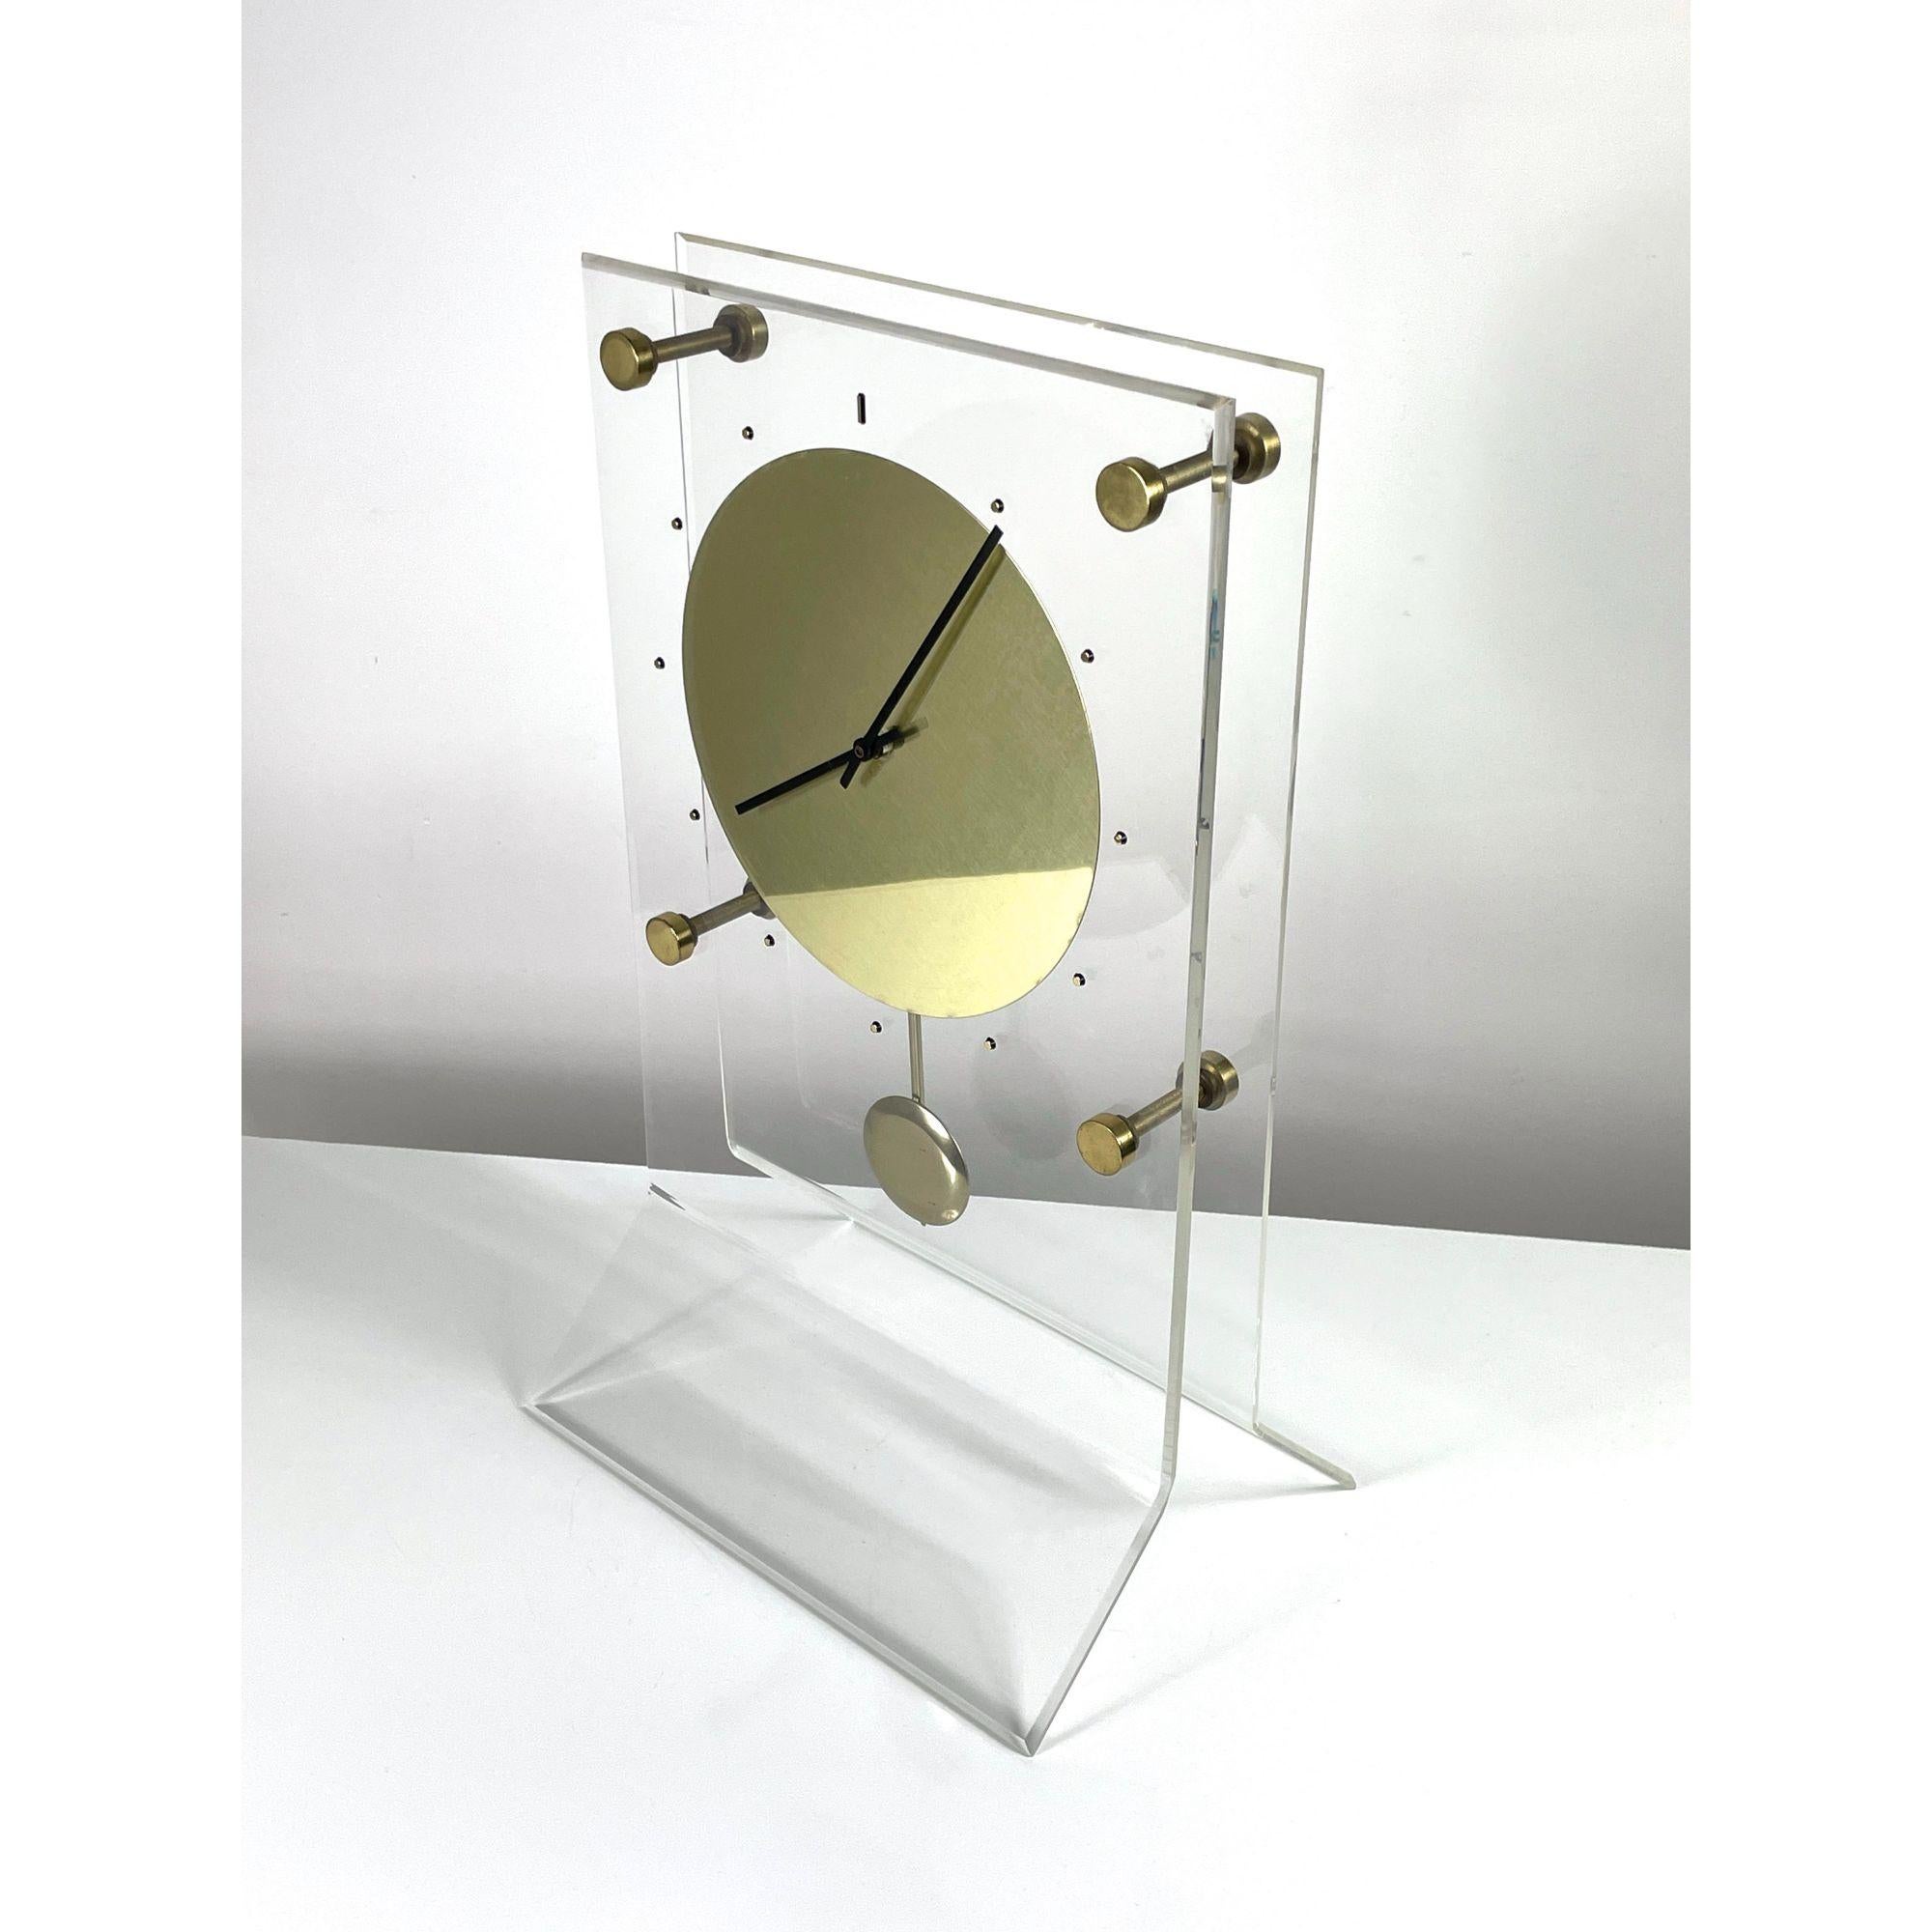 Vintage Large Mid Century Modern Pendulum Mantel Clock in Lucite and Brass 1970s In Good Condition For Sale In Troy, MI